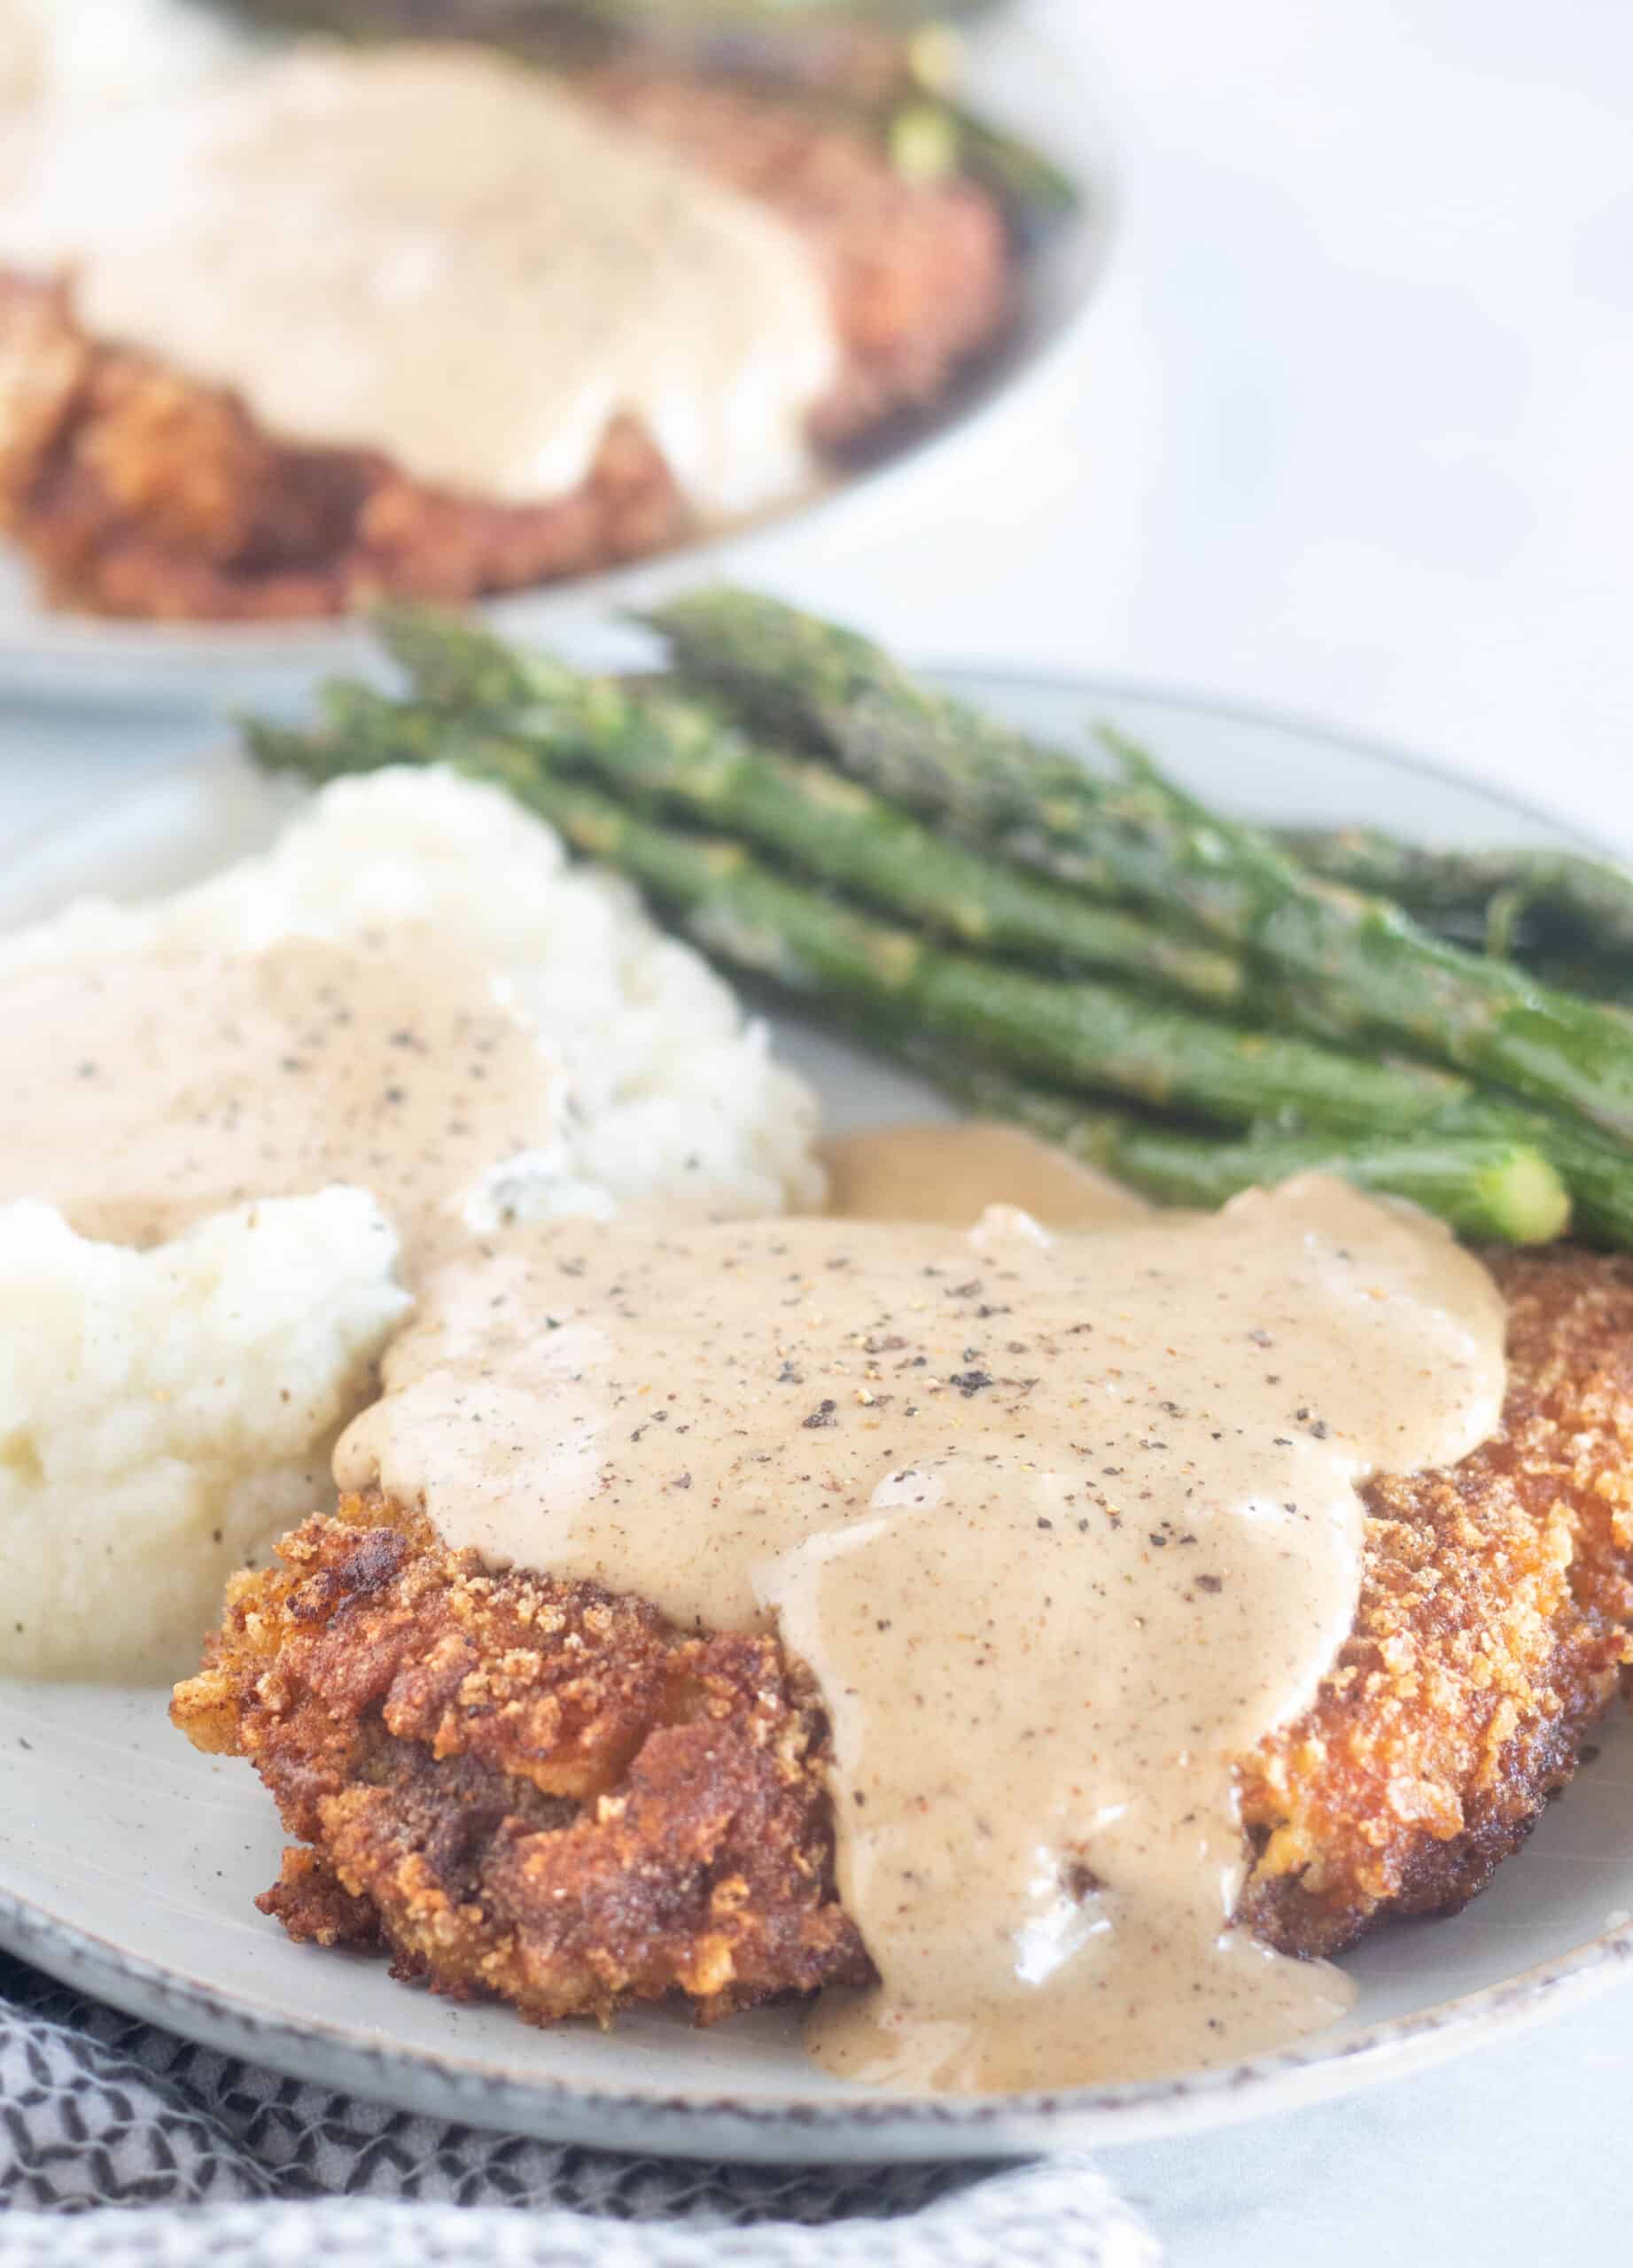 plated chicken fried steak with gravy, mashed cauliflower, and asparagus.